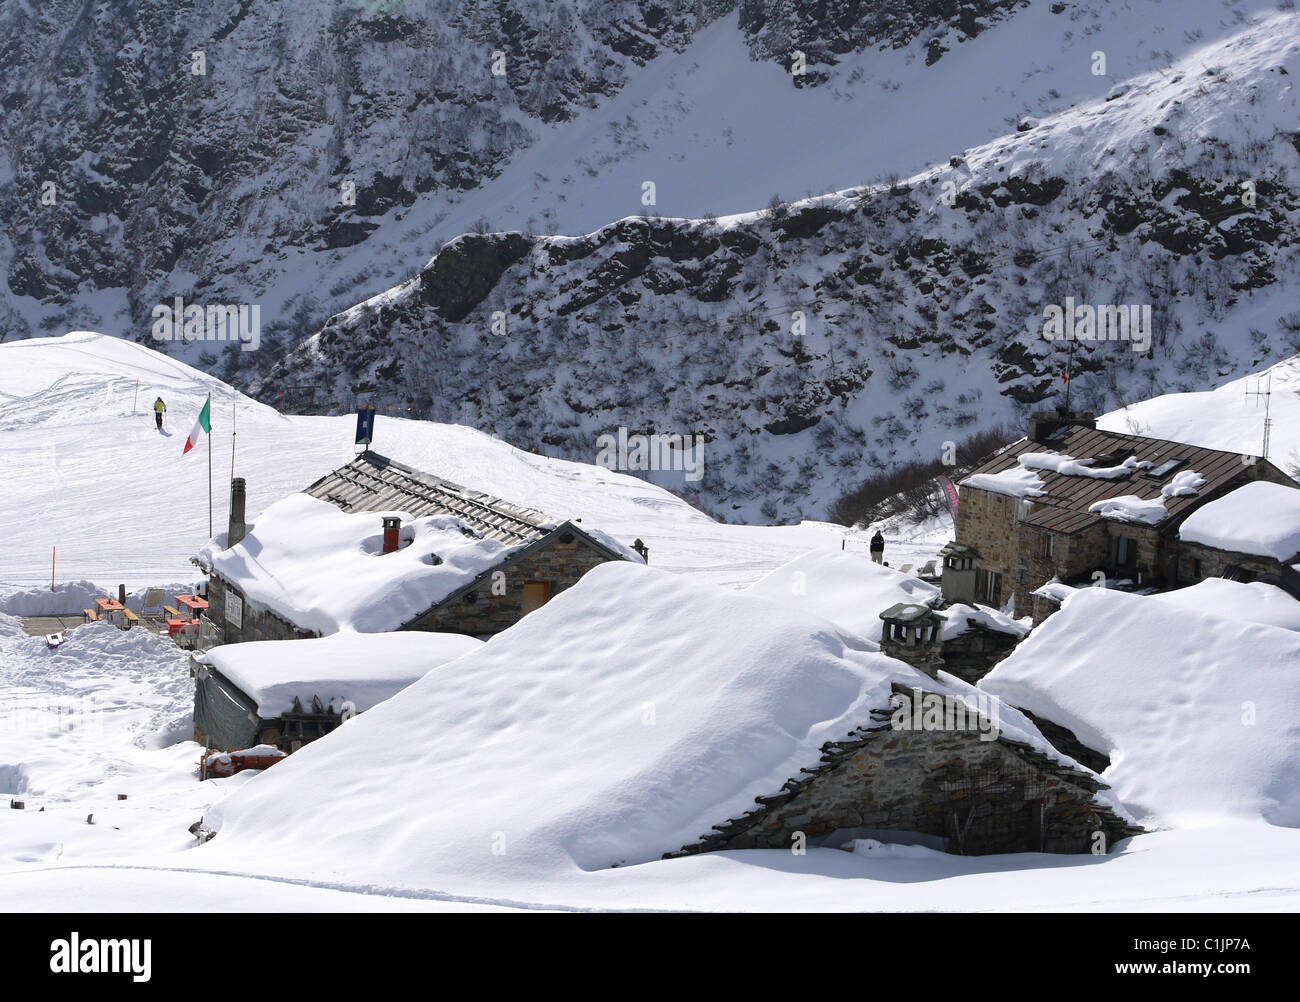 Restaurants and cafes buried in snow by the ski piste at Alagna in Italy Stock Photo